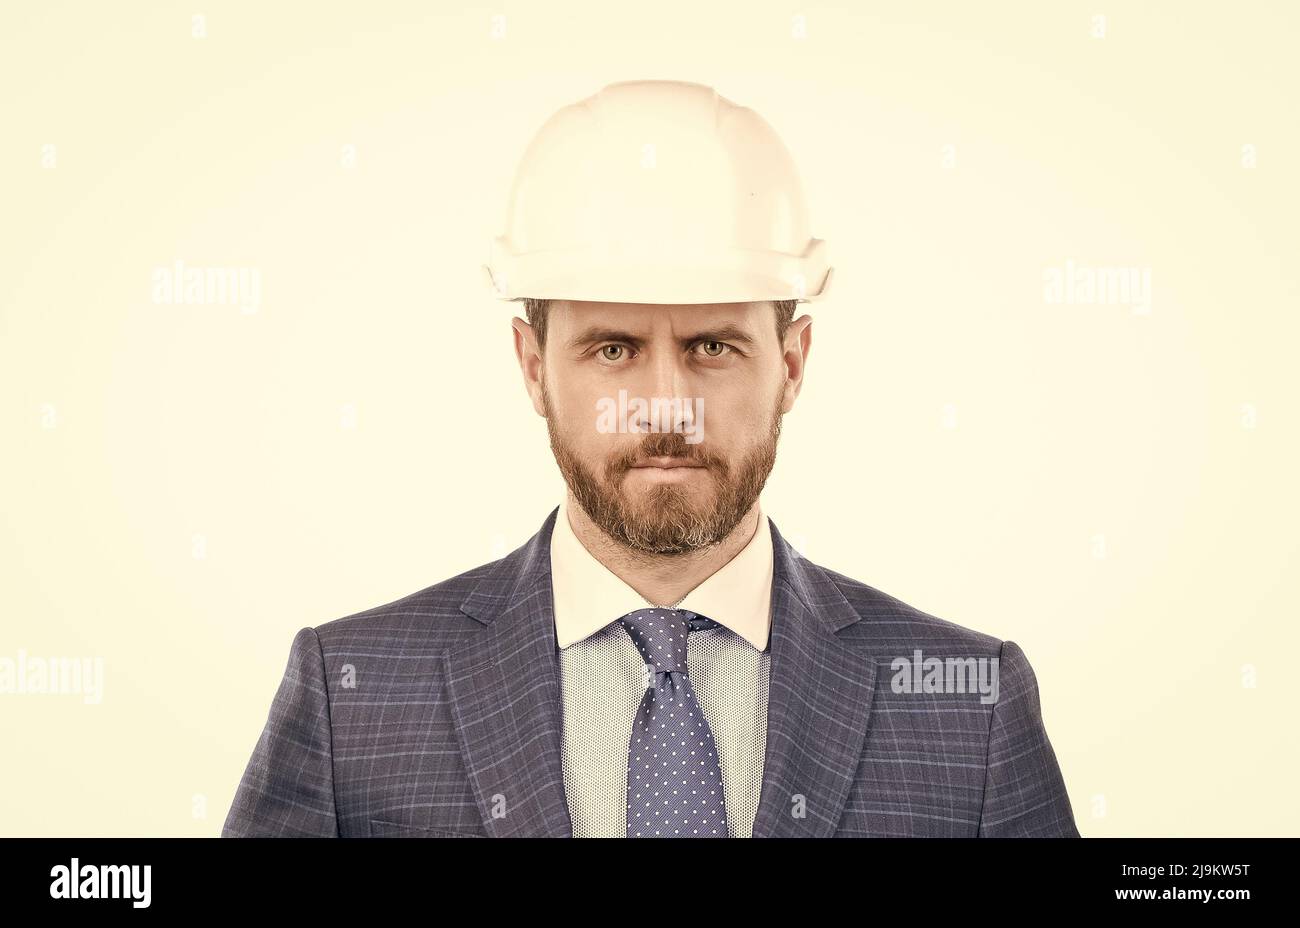 Reliable building. Portrait of engineer. Civil engineer with serious face. Constructor Stock Photo